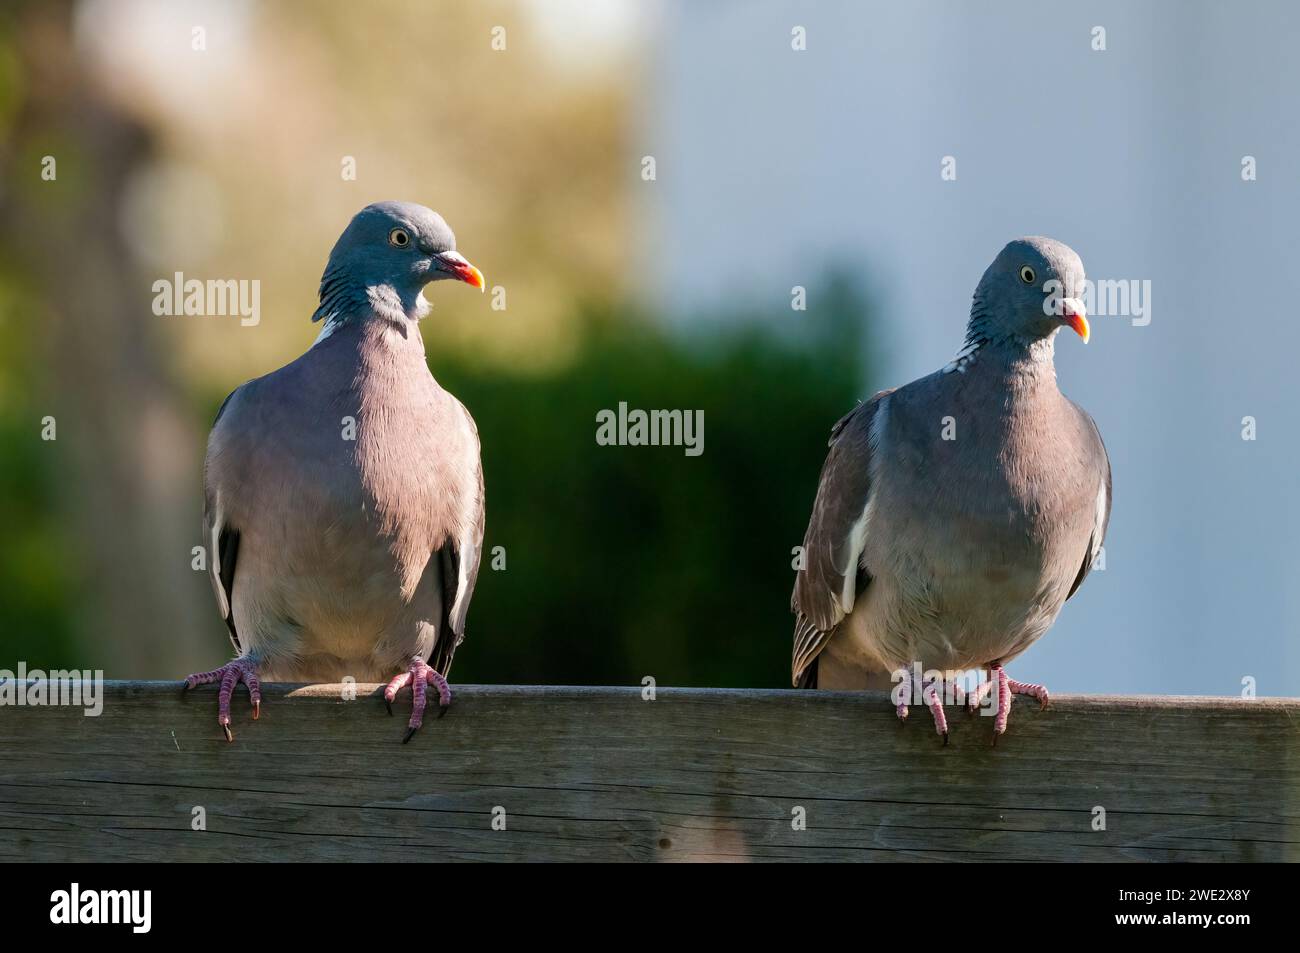 common wood pigeon, Columba palumbus, perched on a wooden fence, Catalonia, Spain Stock Photo